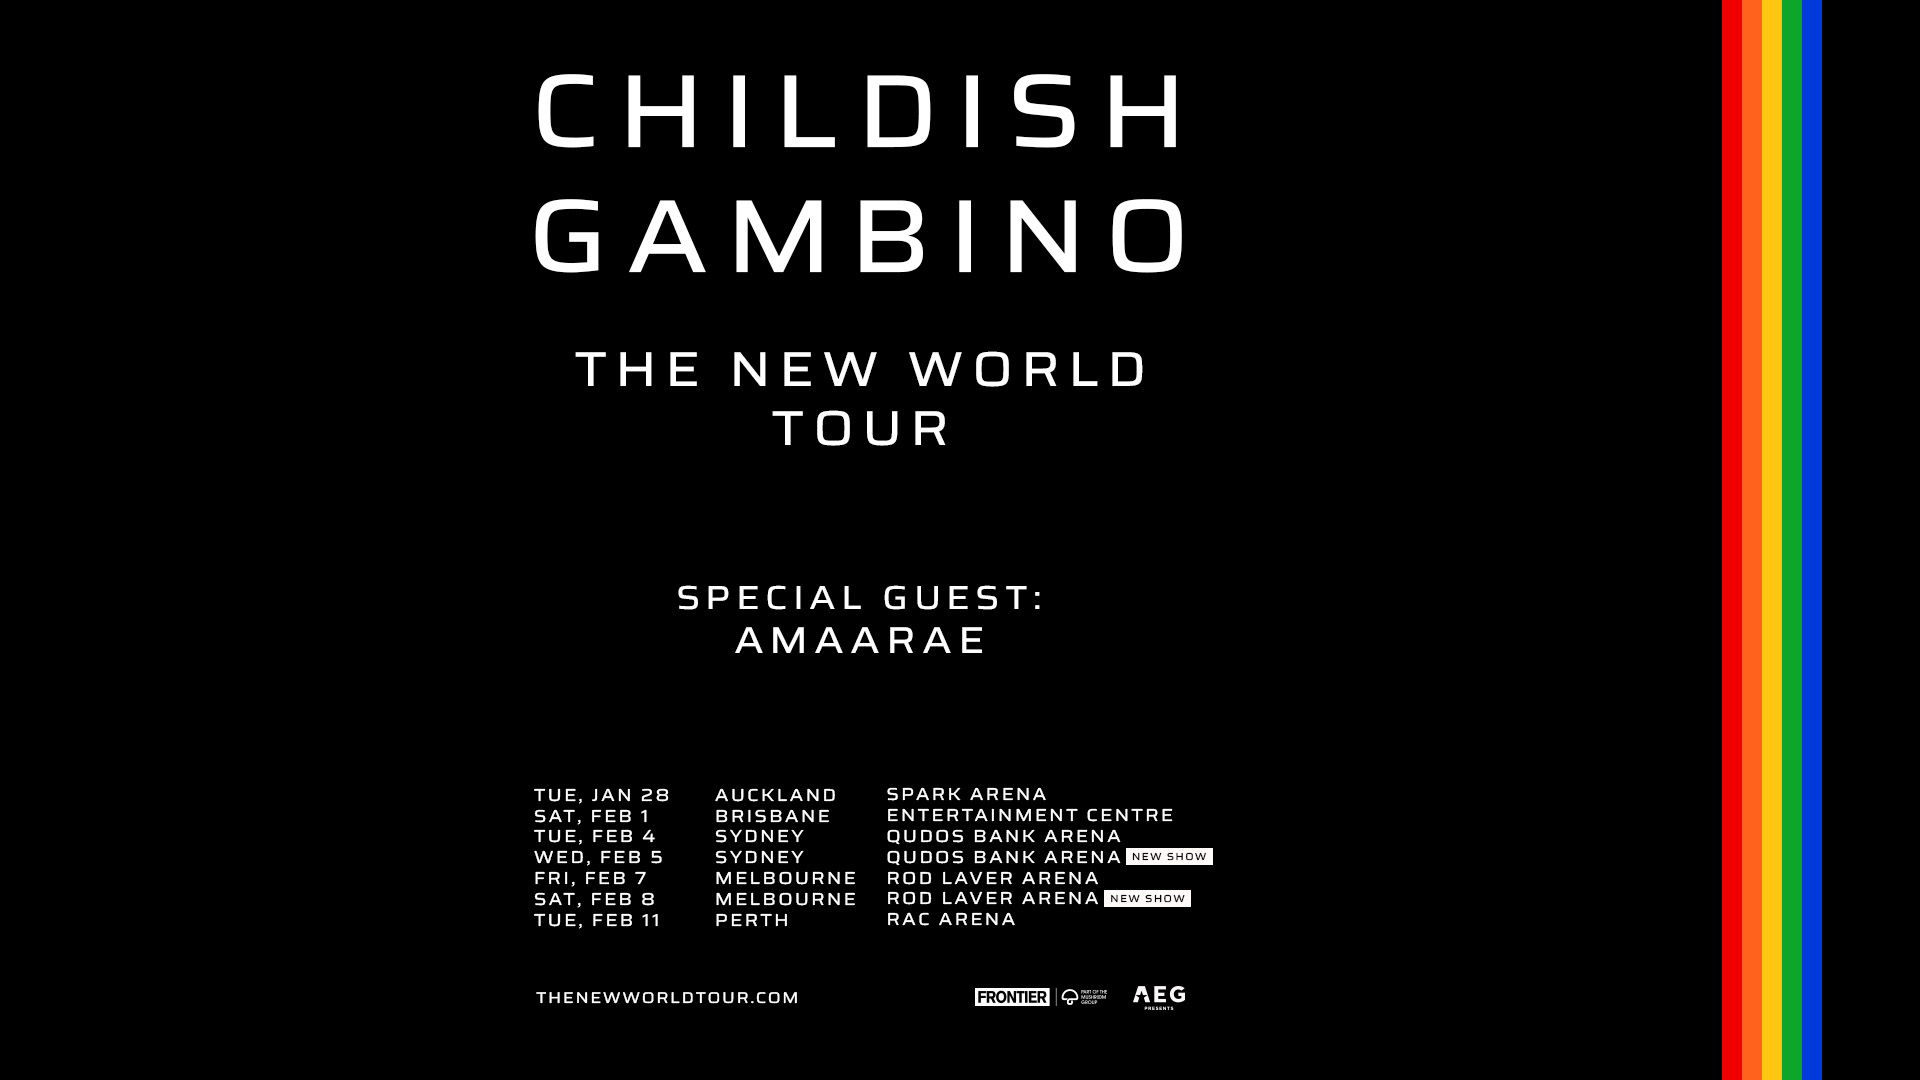 CHILDISH GAMBINO ADDS SECOND SYDNEY SHOW TO THE NEW WORLD TOUR TO SATISFY OVERWHELMING DEMAND